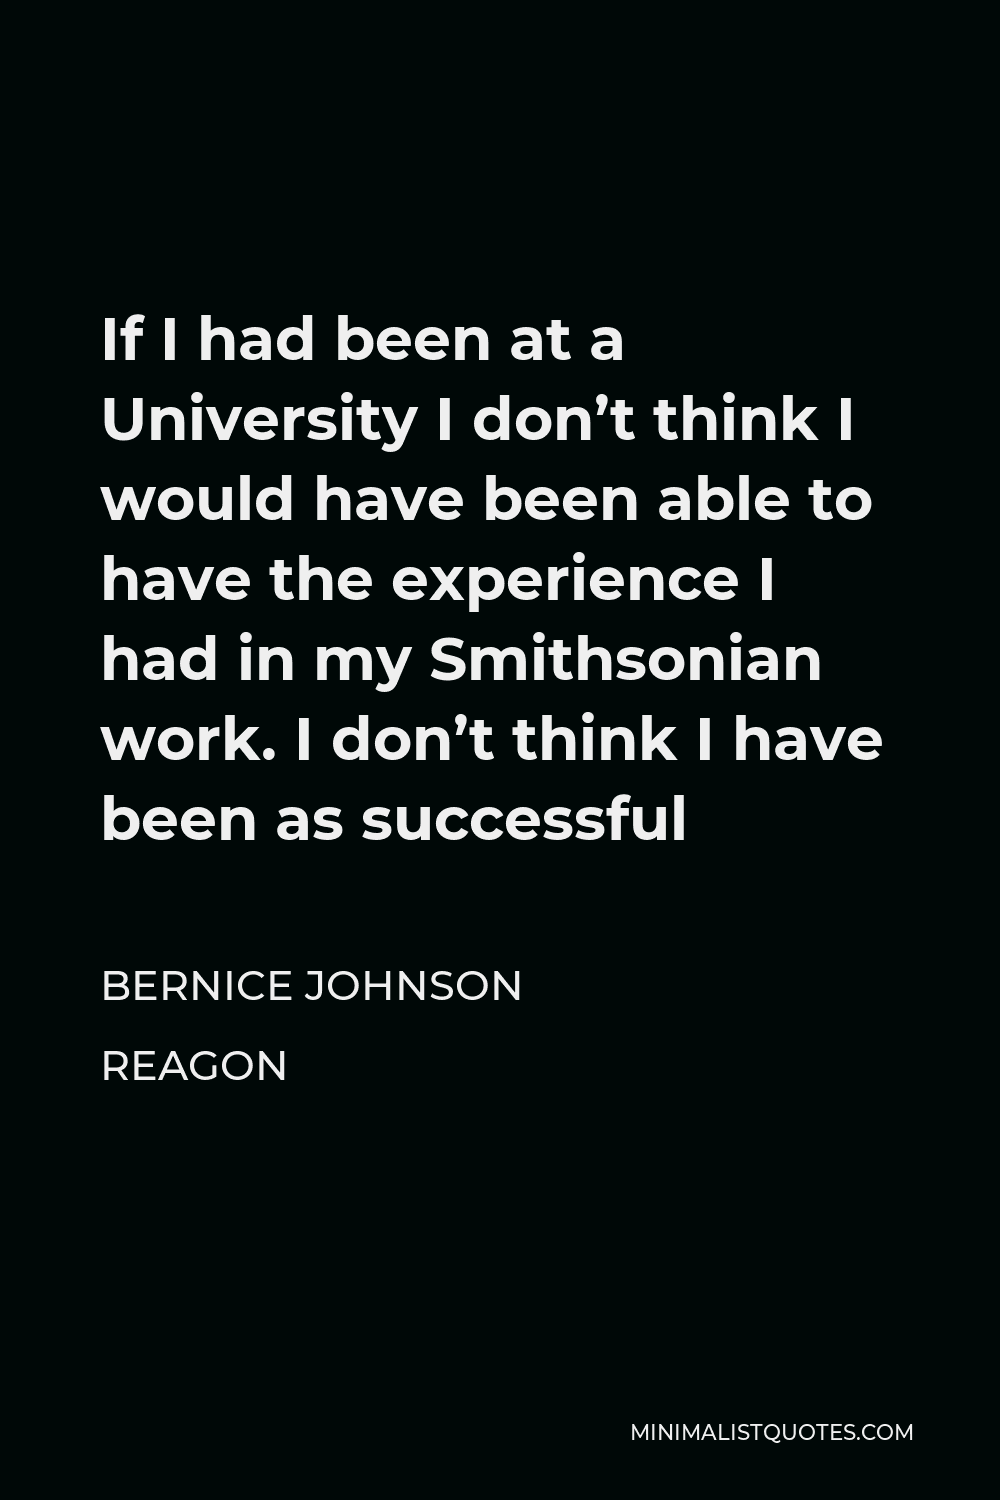 Bernice Johnson Reagon Quote - If I had been at a University I don’t think I would have been able to have the experience I had in my Smithsonian work. I don’t think I have been as successful